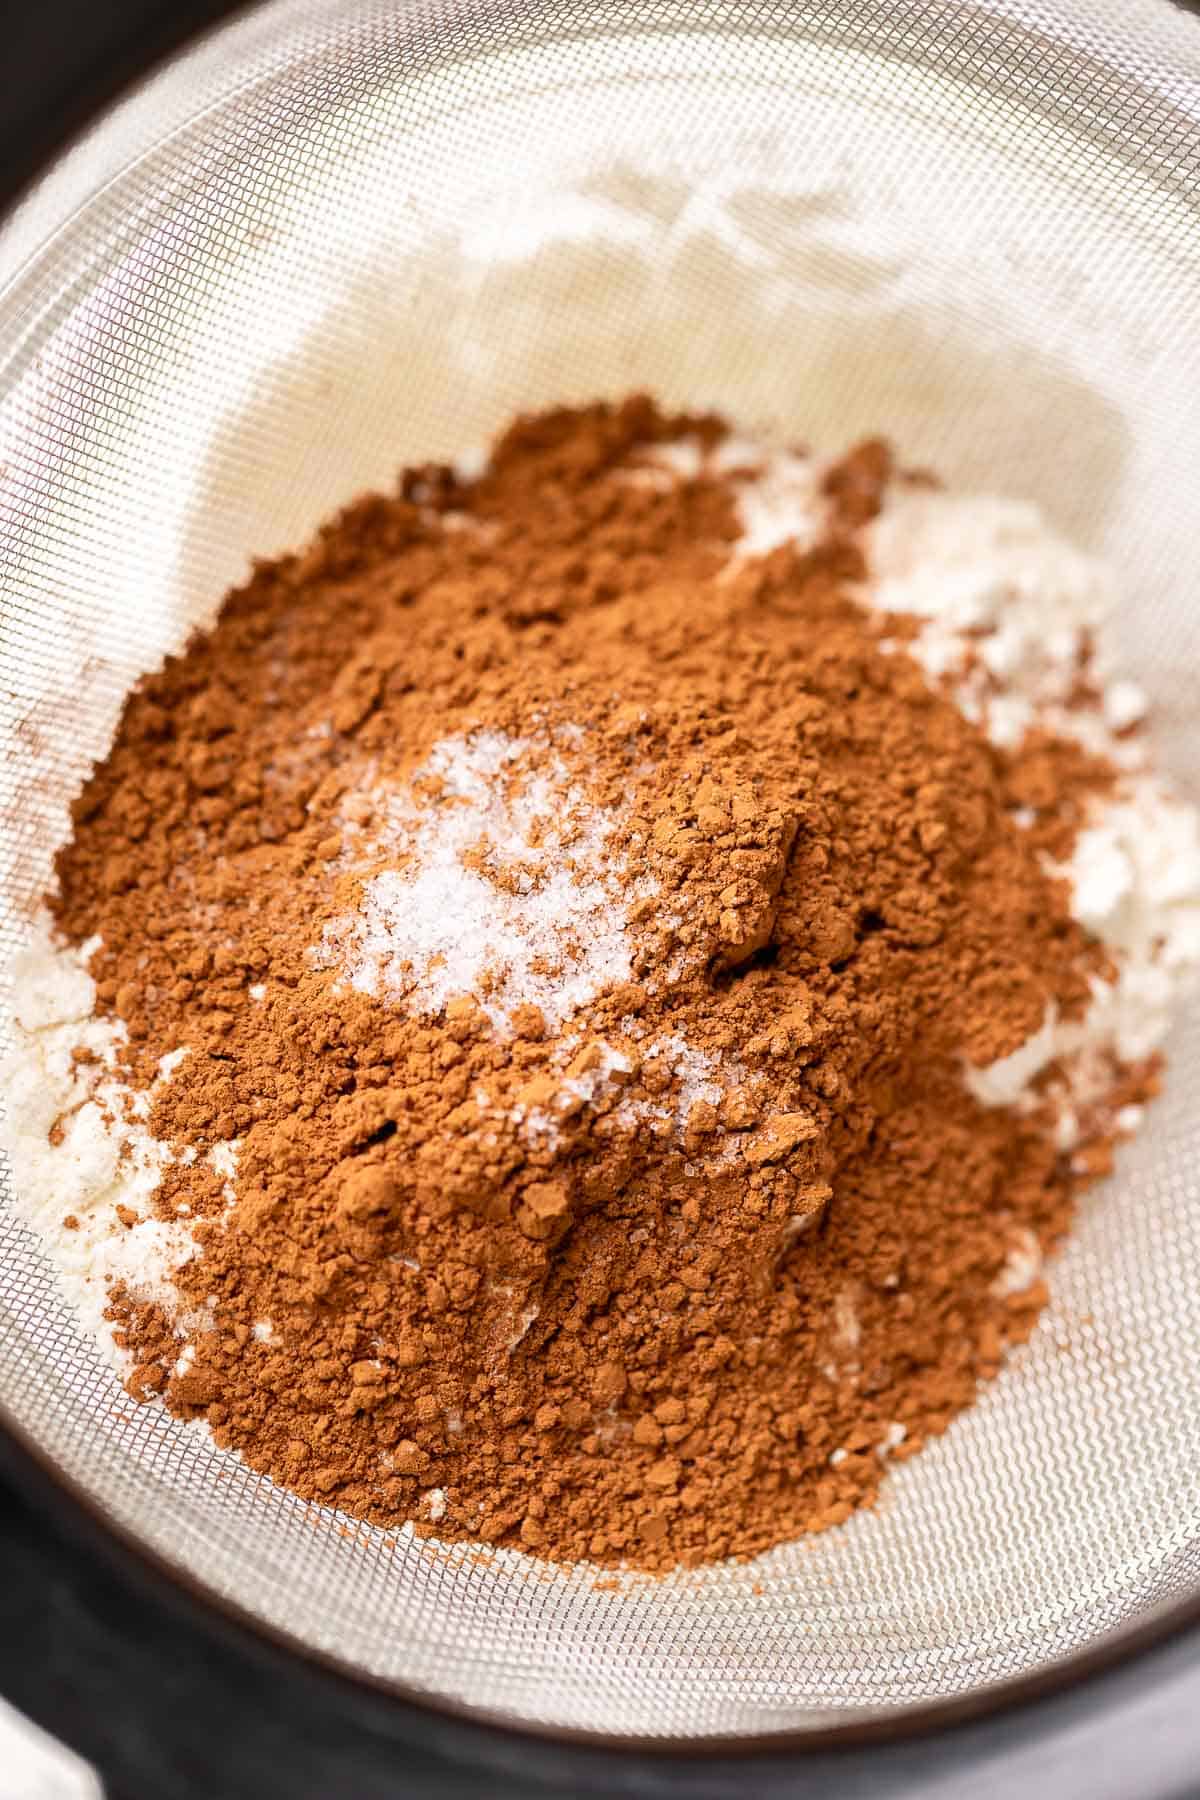 A pile of cocoa powder and flour in a sifter before sifting.